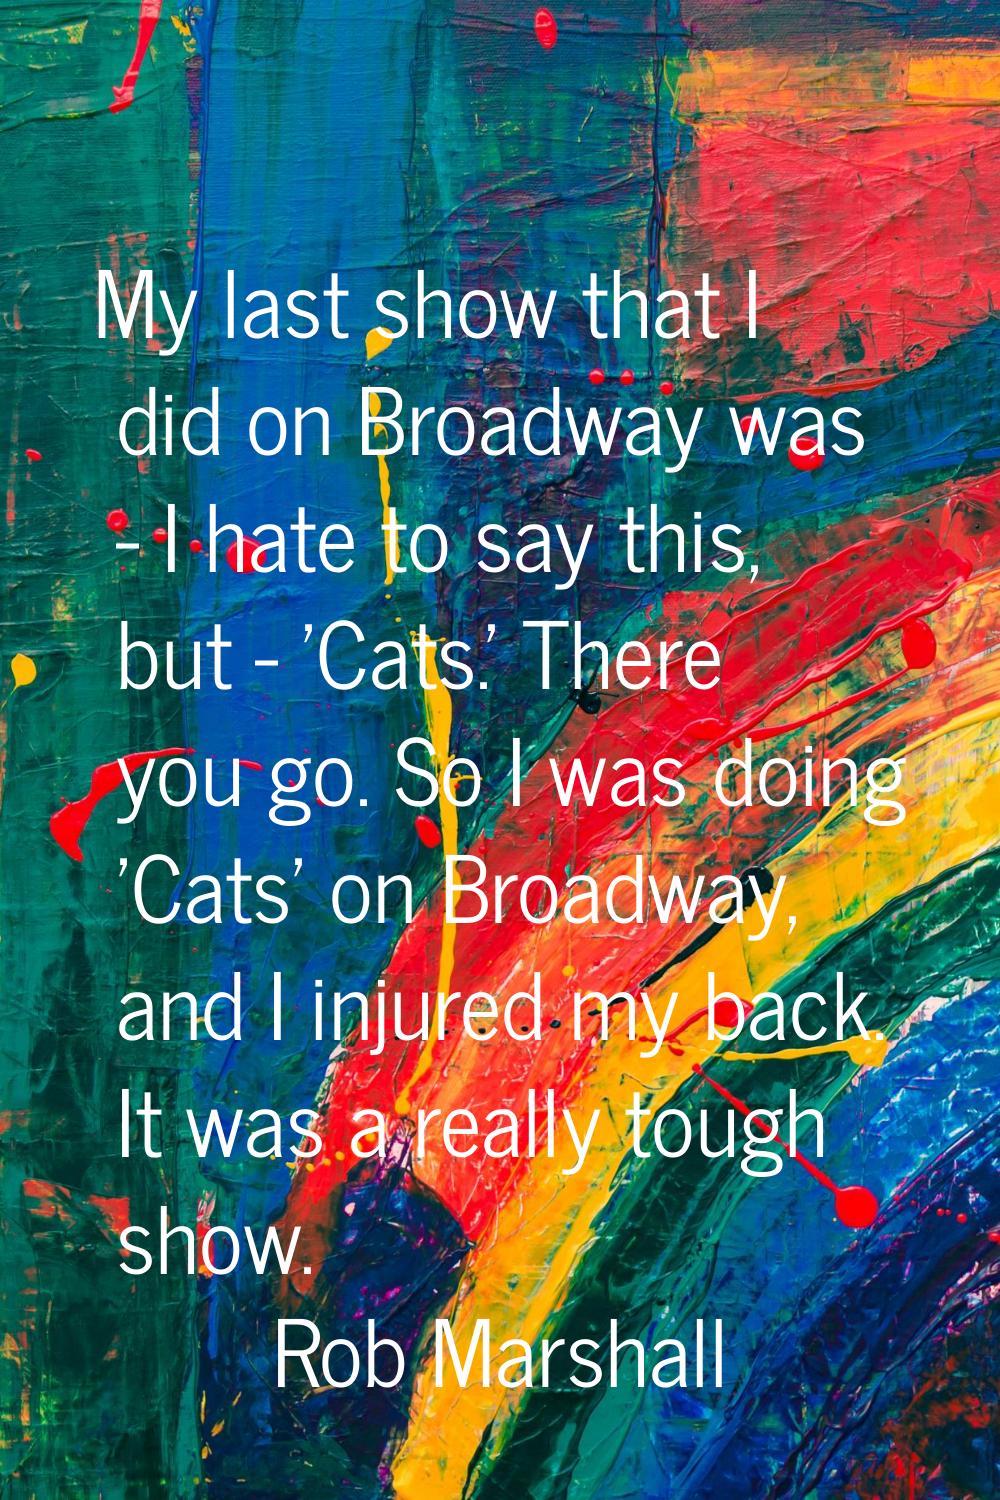 My last show that I did on Broadway was - I hate to say this, but - 'Cats.' There you go. So I was 